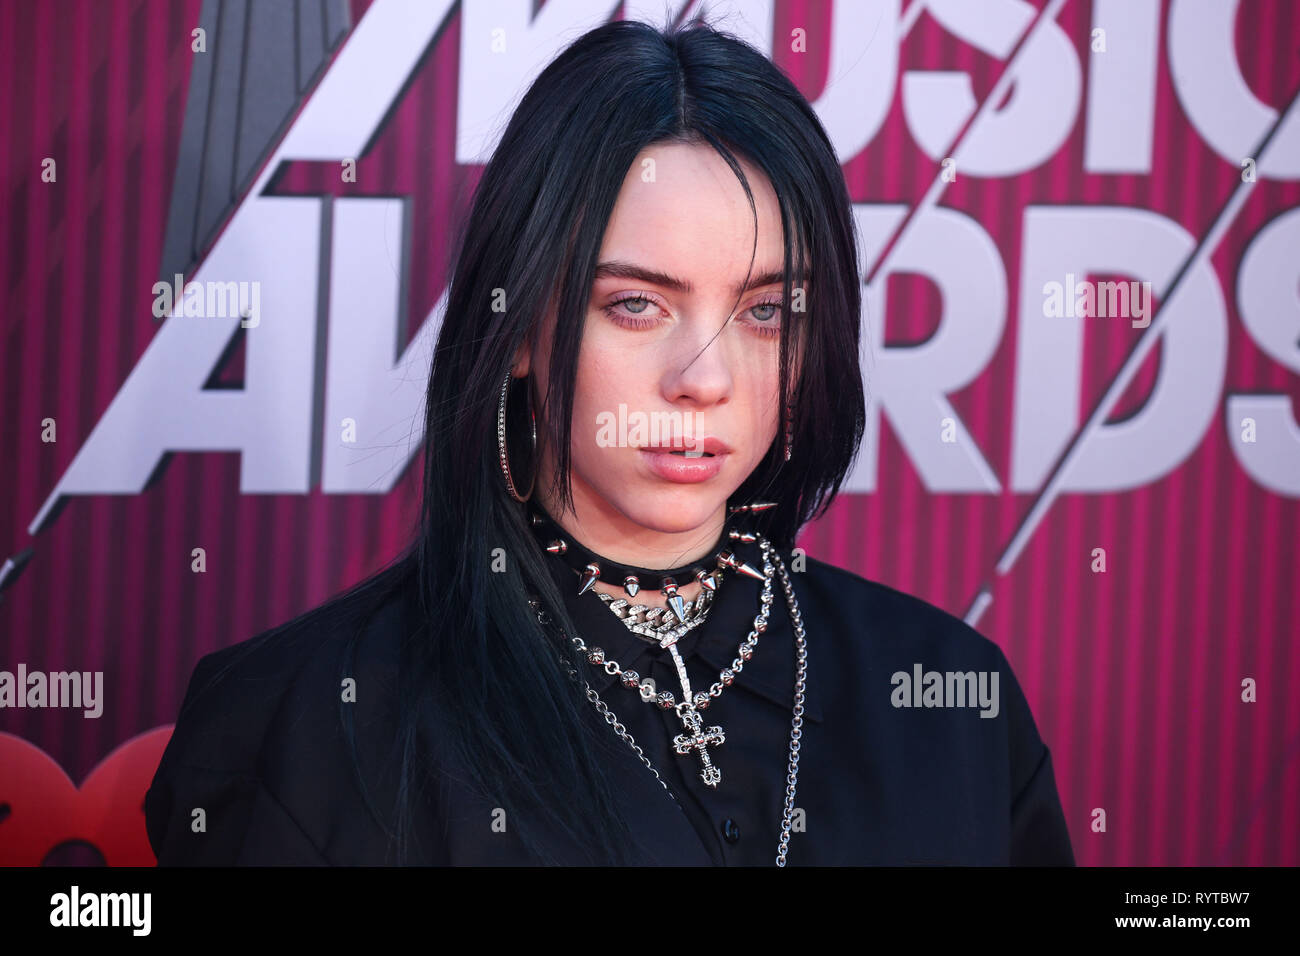 Billie Eilish's blue hair and outfit at the 2019 iHeartRadio Music Awards - wide 2